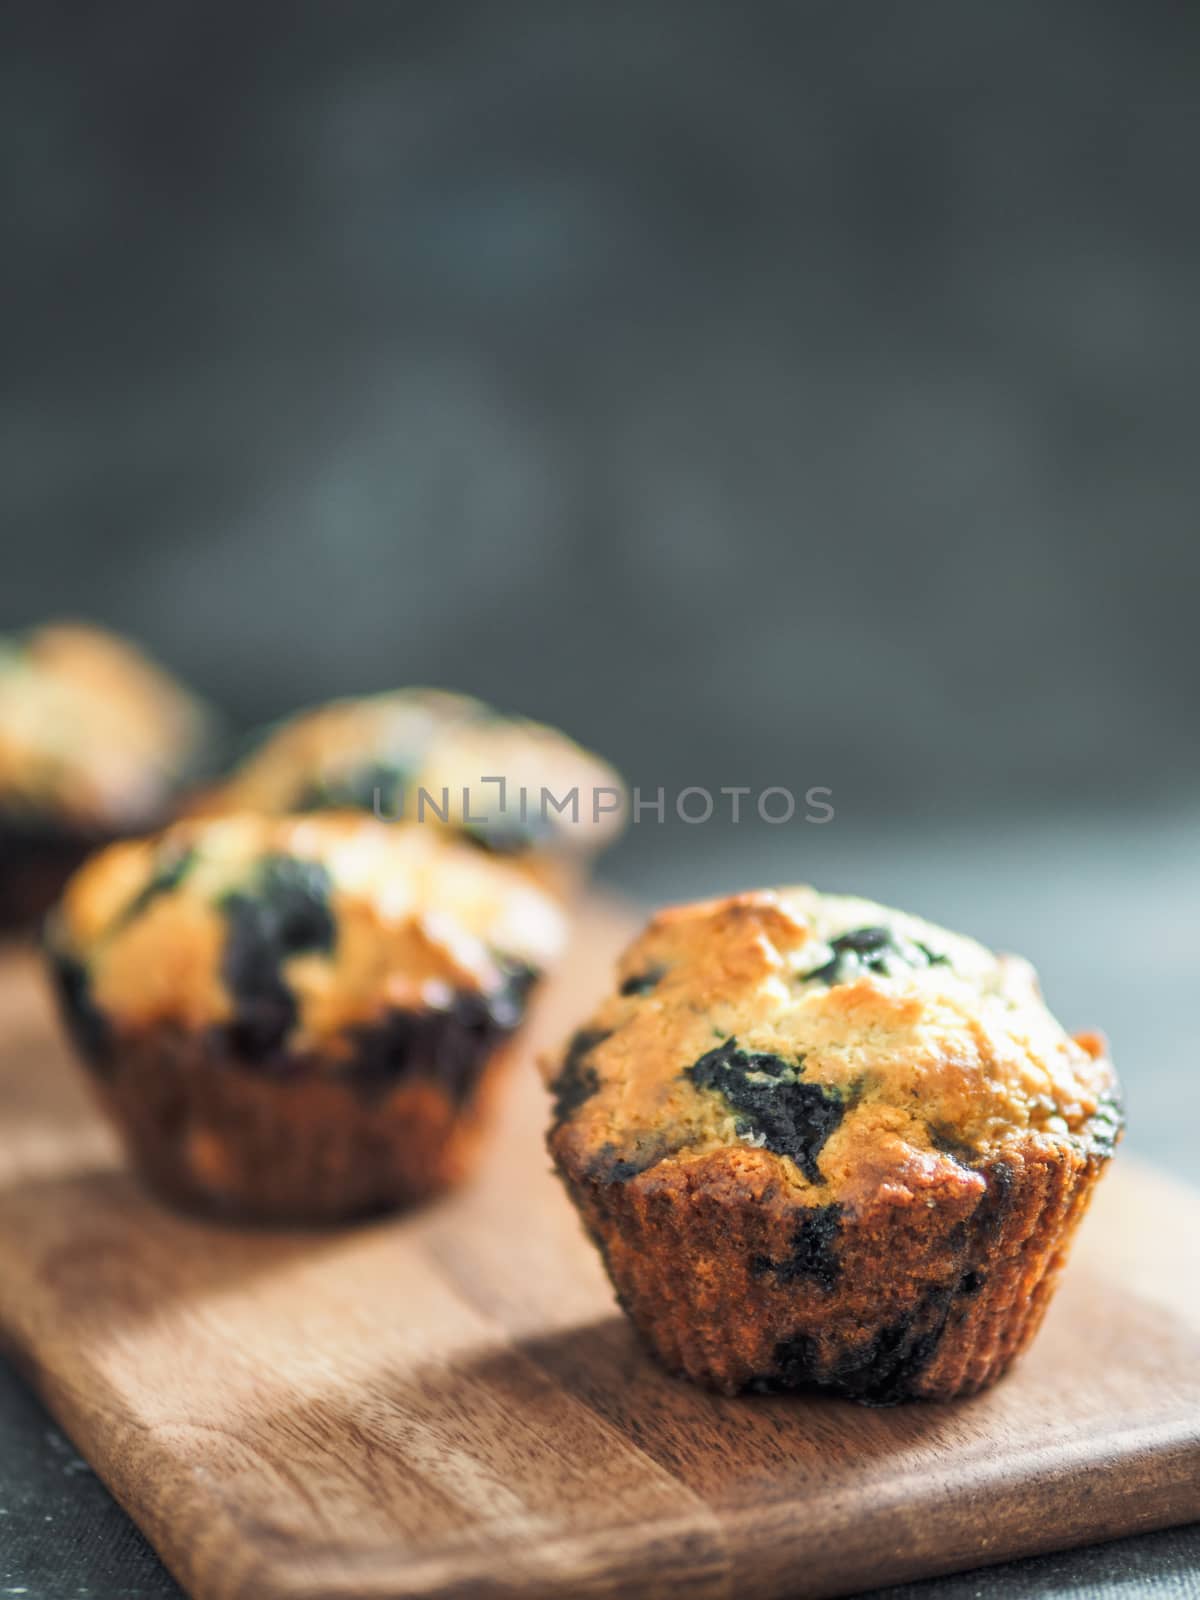 Homemade vegan blueberry muffins on dark background. Copy space for text or design